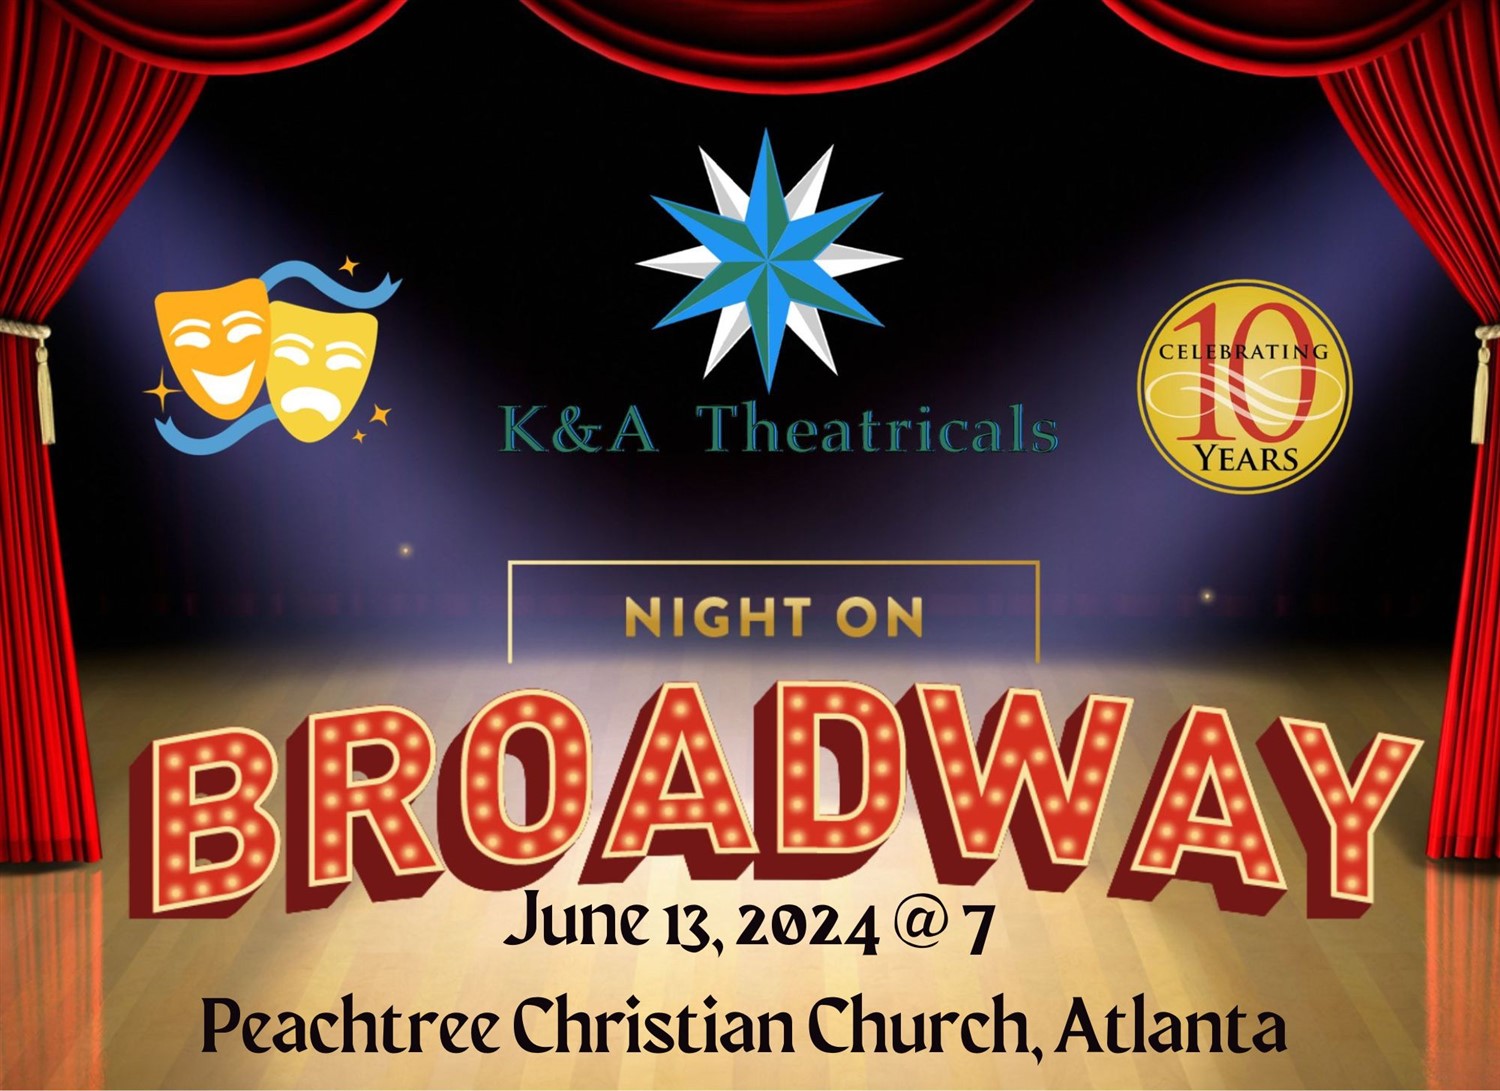 K&A Theatricals Night of Broadway Celebrating 10 Years of Broadway Performing Arts. A Benefit for the K&A Theatricals Scholarship Fund on Jun 13, 19:00@Peachtree Christian Church - Buy tickets and Get information on Www.kandatheatricals.com 